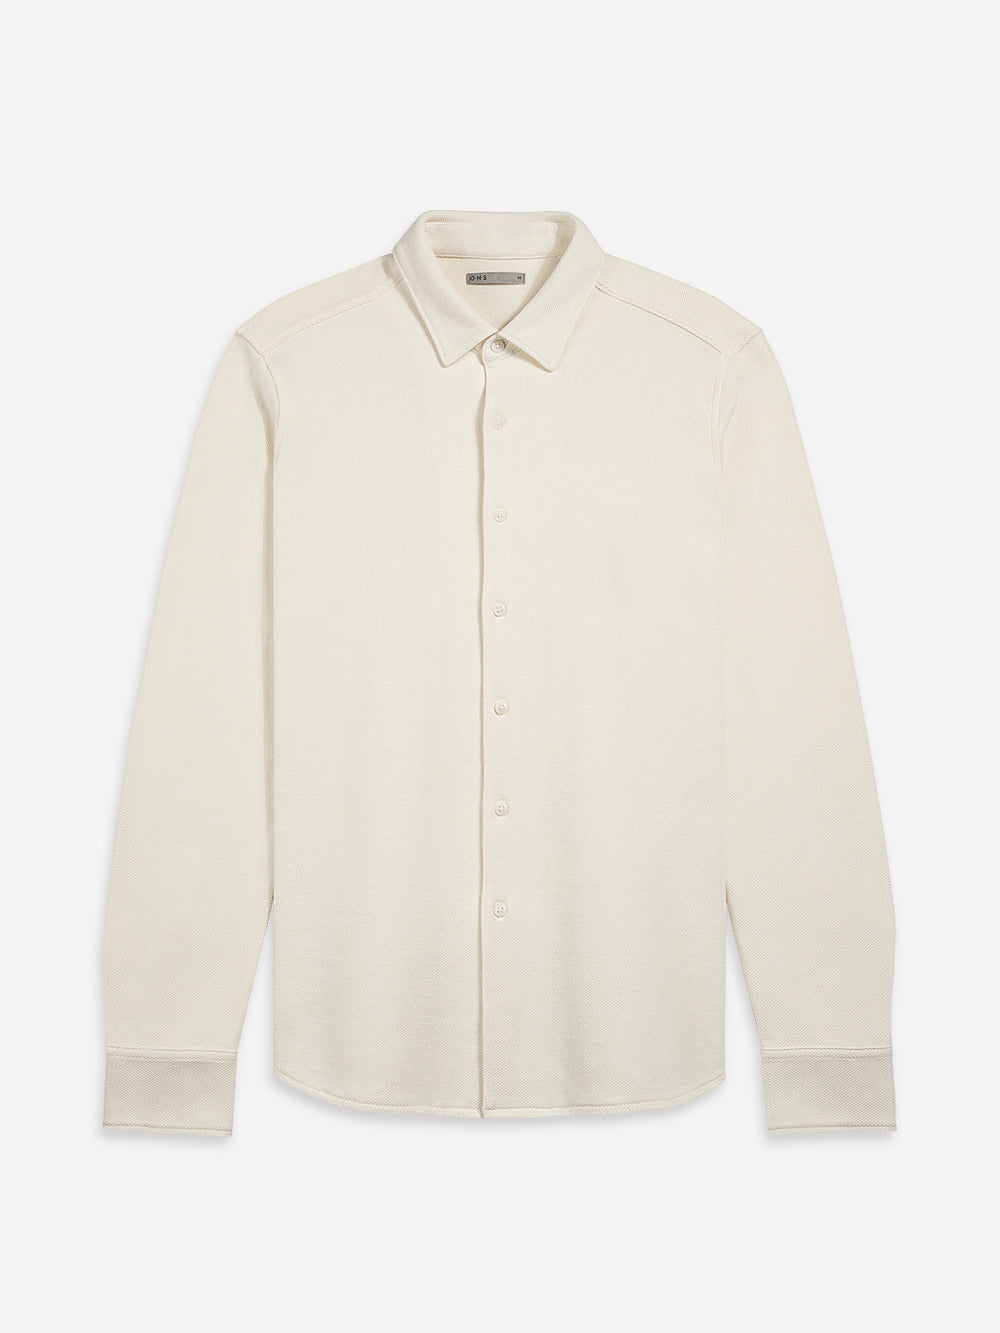 Cream Darcy Knit Men's O.N.S Button Up Shirt